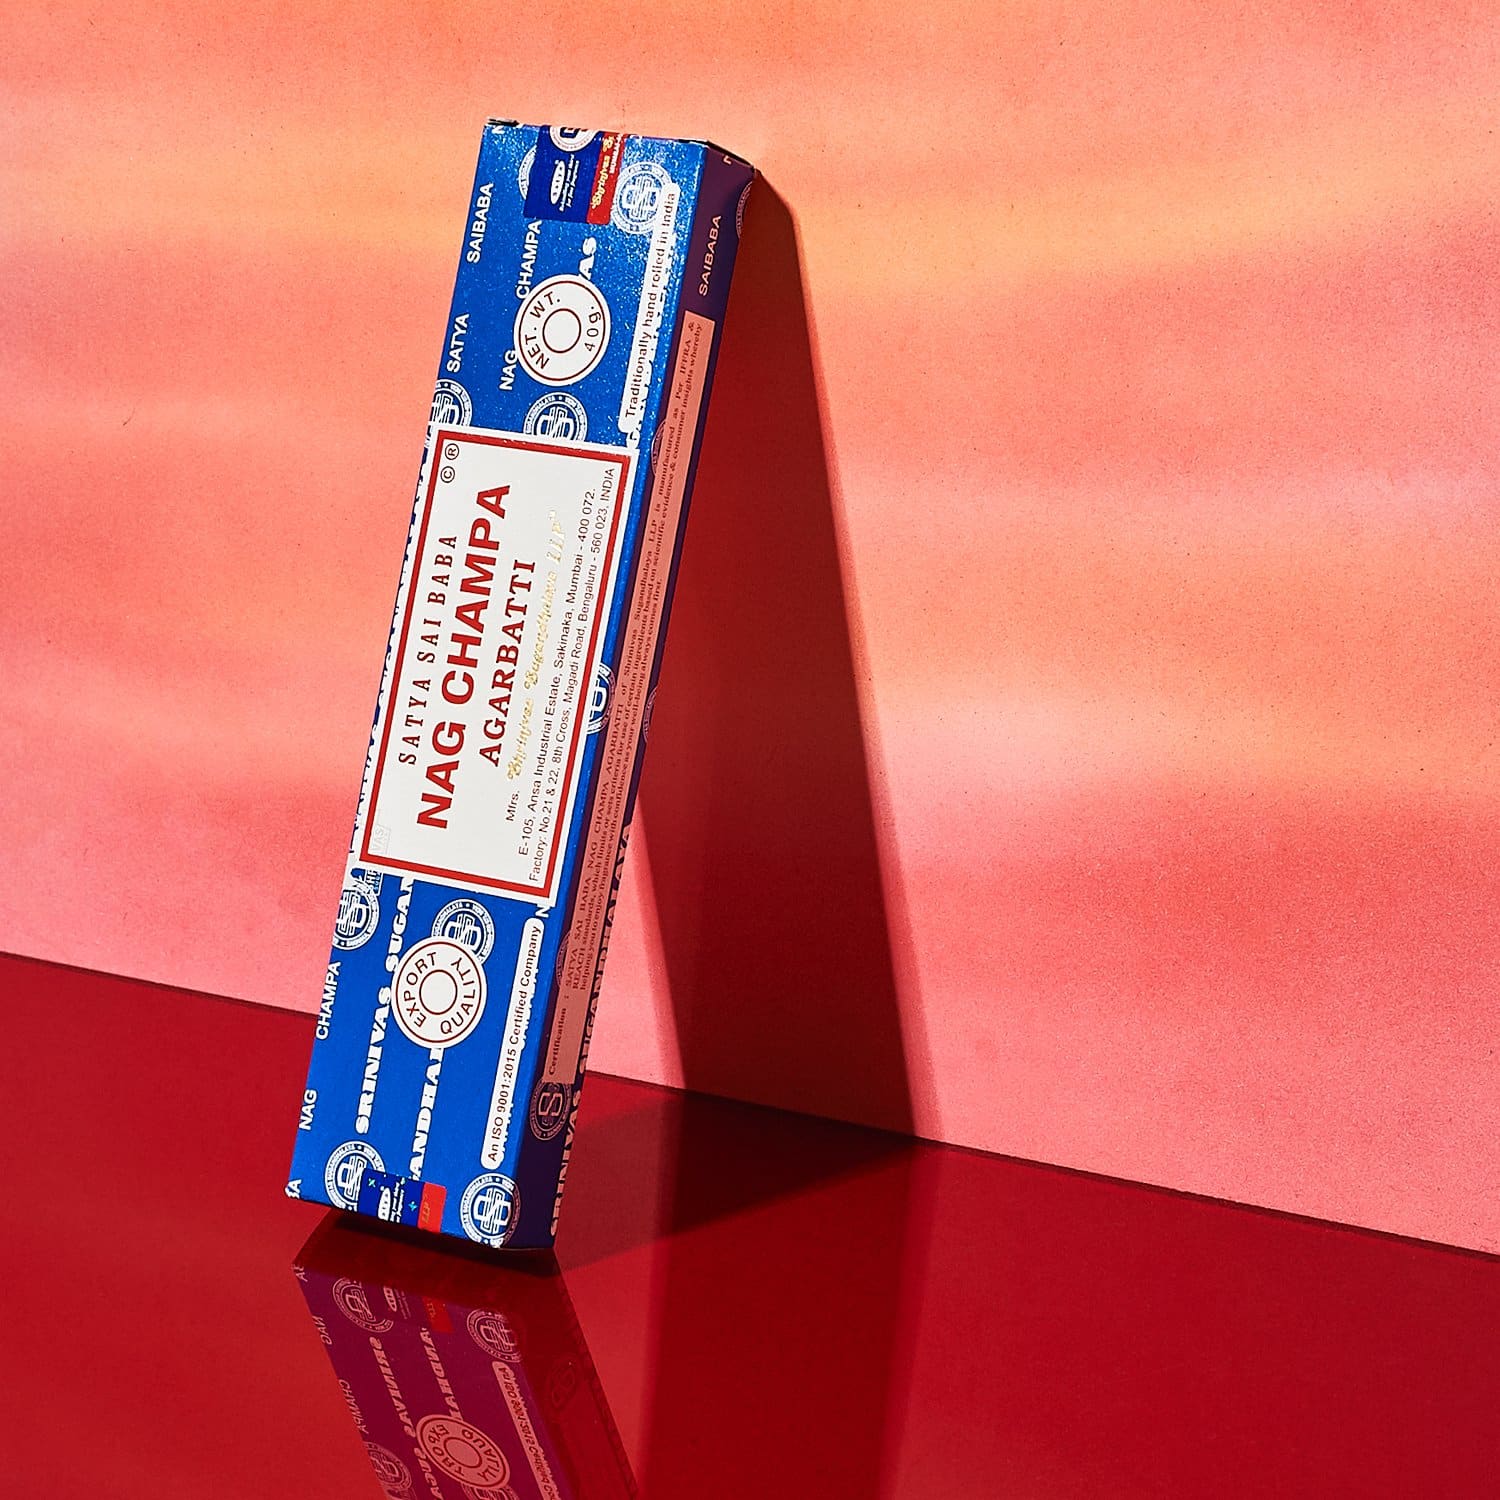 Nag Champa Indian Incense  Incense, Room Sprays, Candles @ FriendsNYC